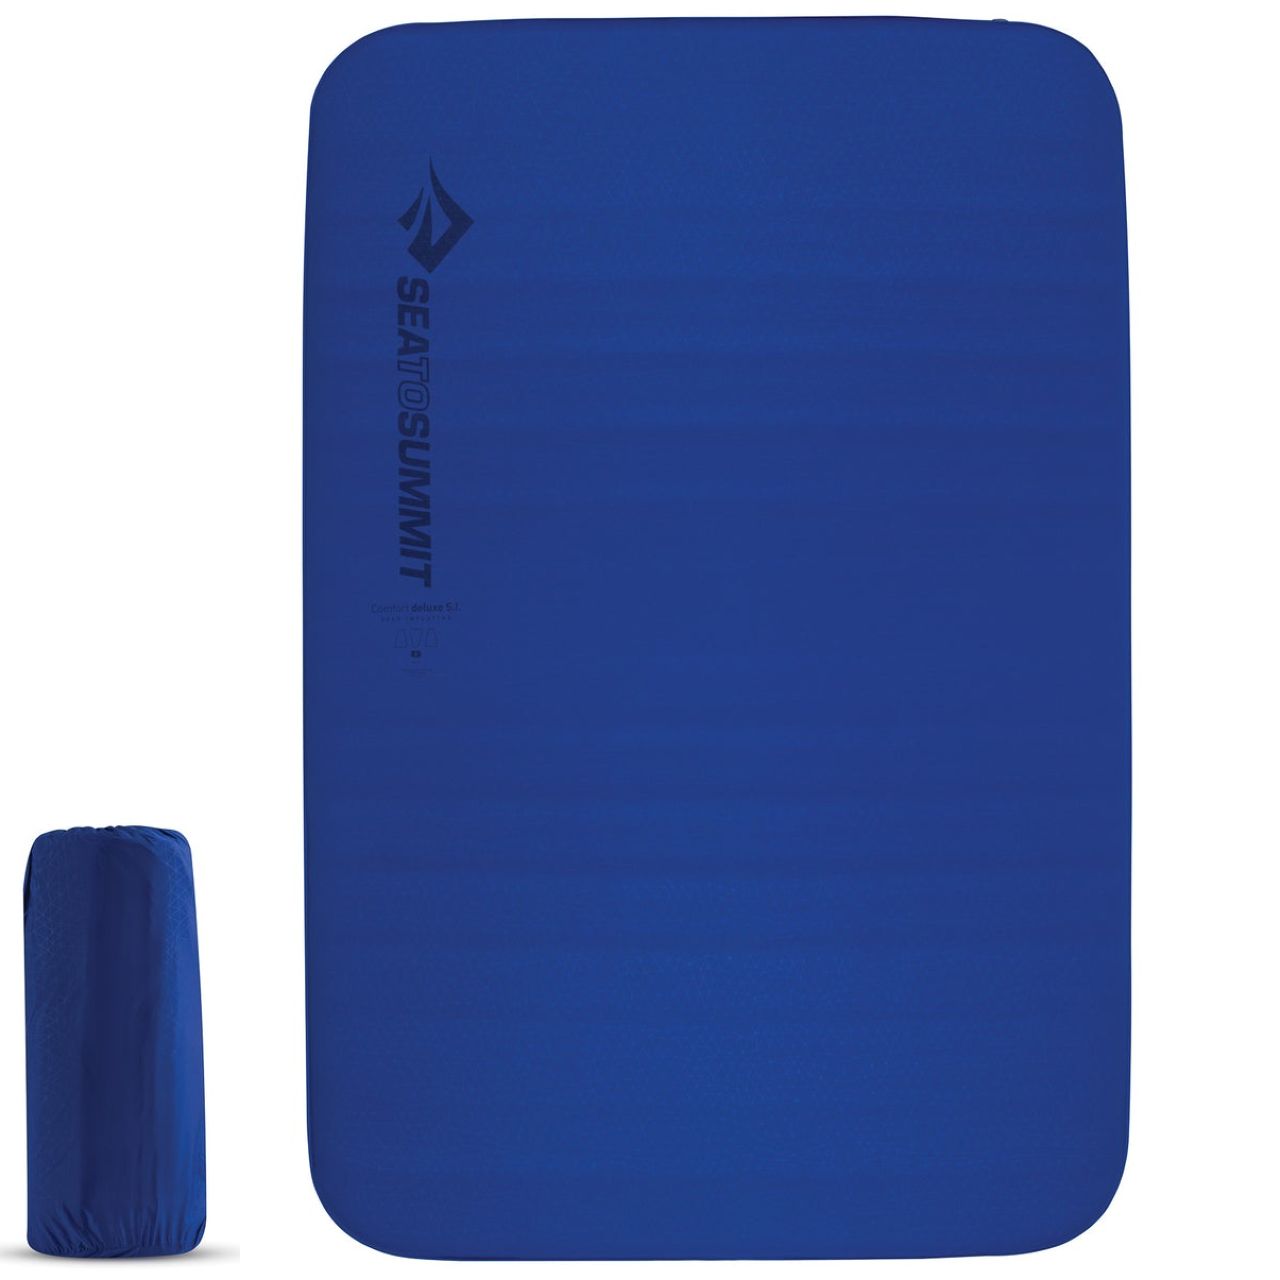 Sea Summit Deluxe Mat - Double | Self-Inflating Sleeping Pads